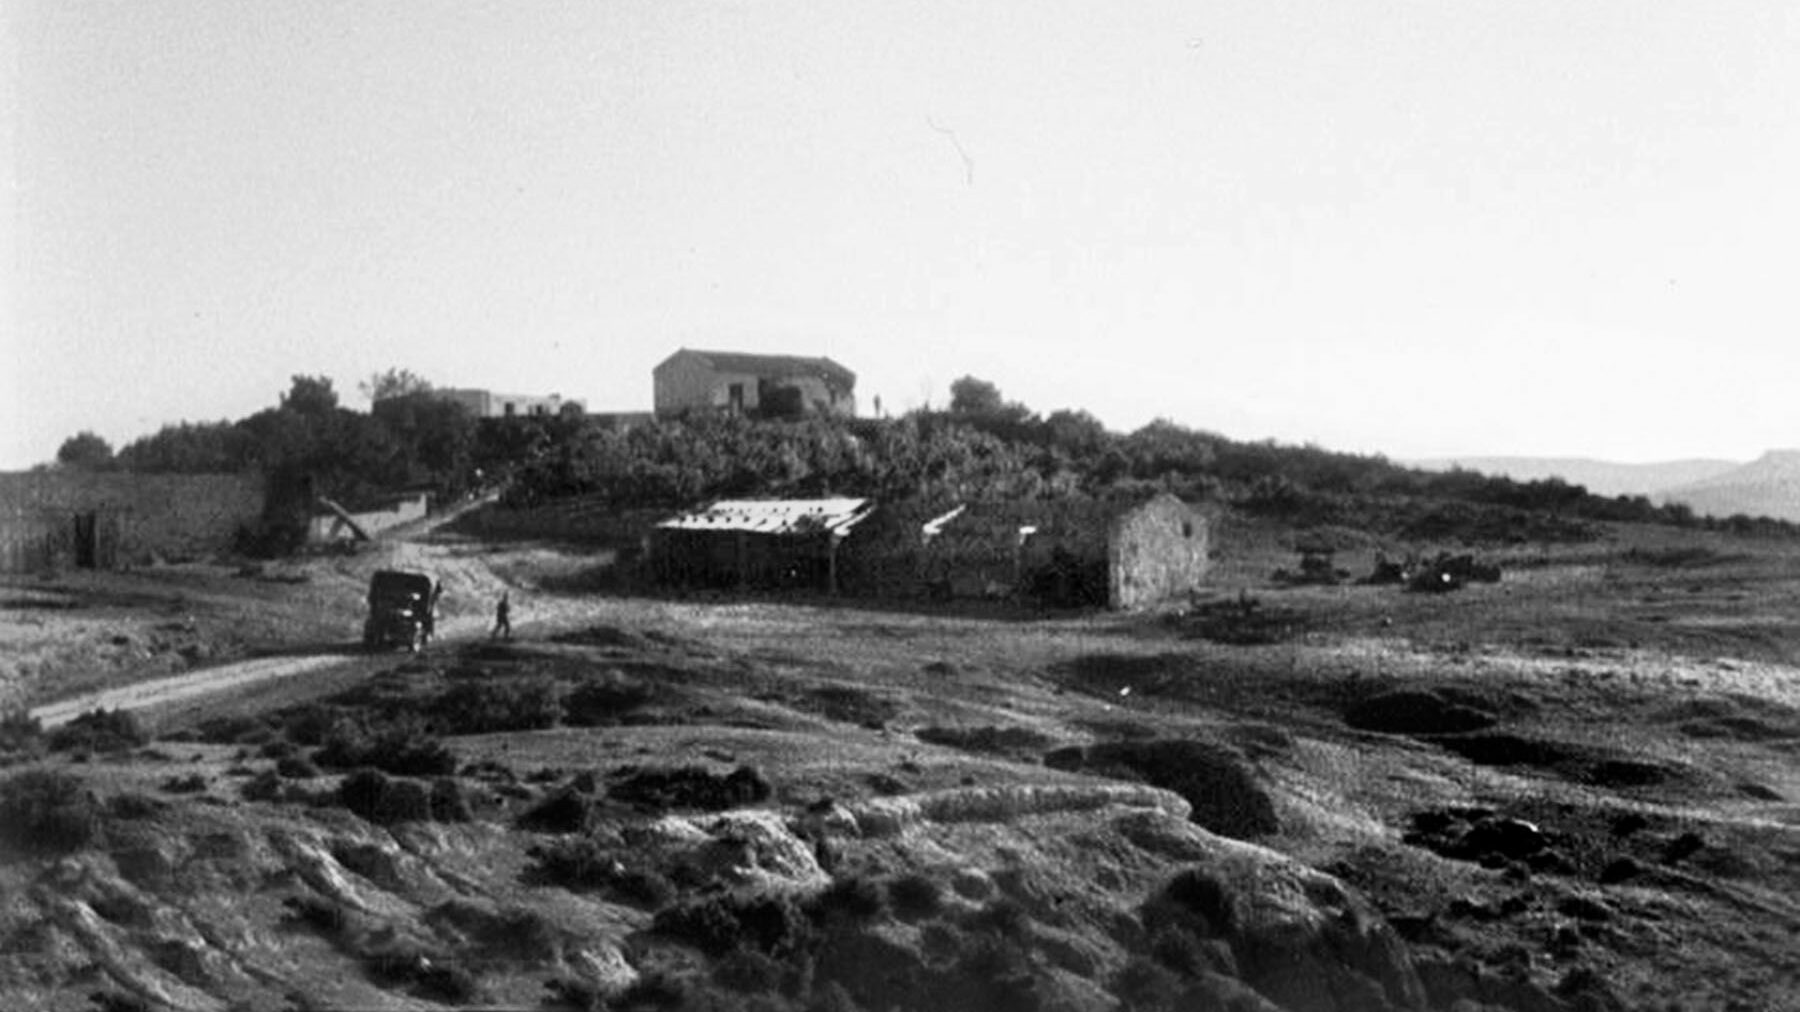 The area nicknamed Steamroller Farm by British soldiers is seen in a still frame from a film shot by the British Army sometime after the fighting in the vicinity. 